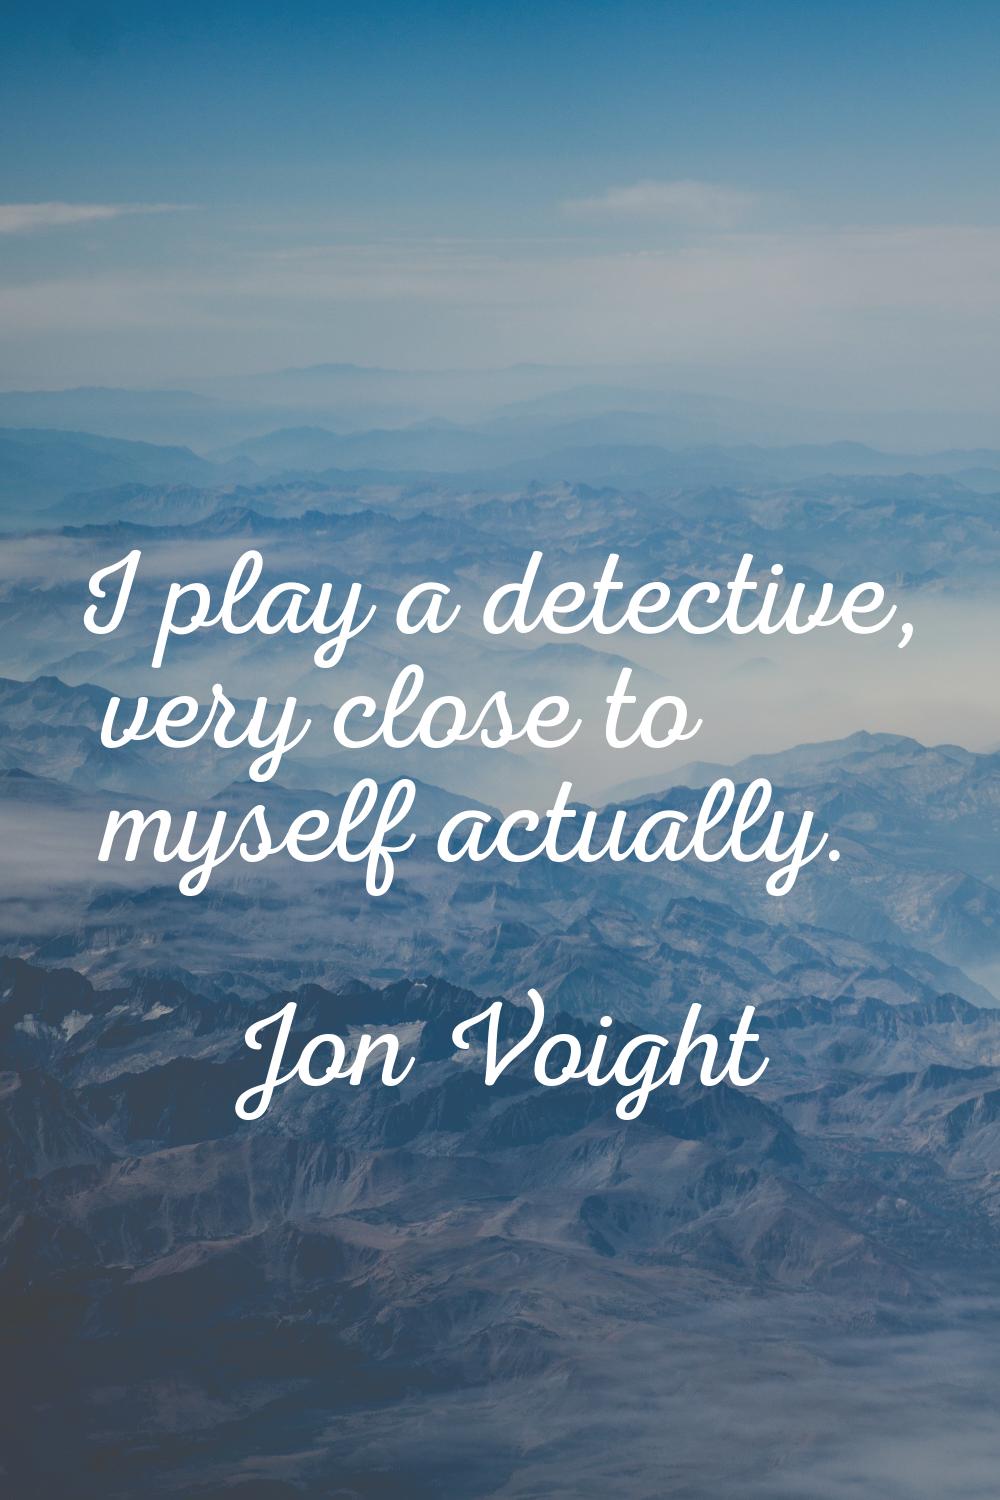 I play a detective, very close to myself actually.